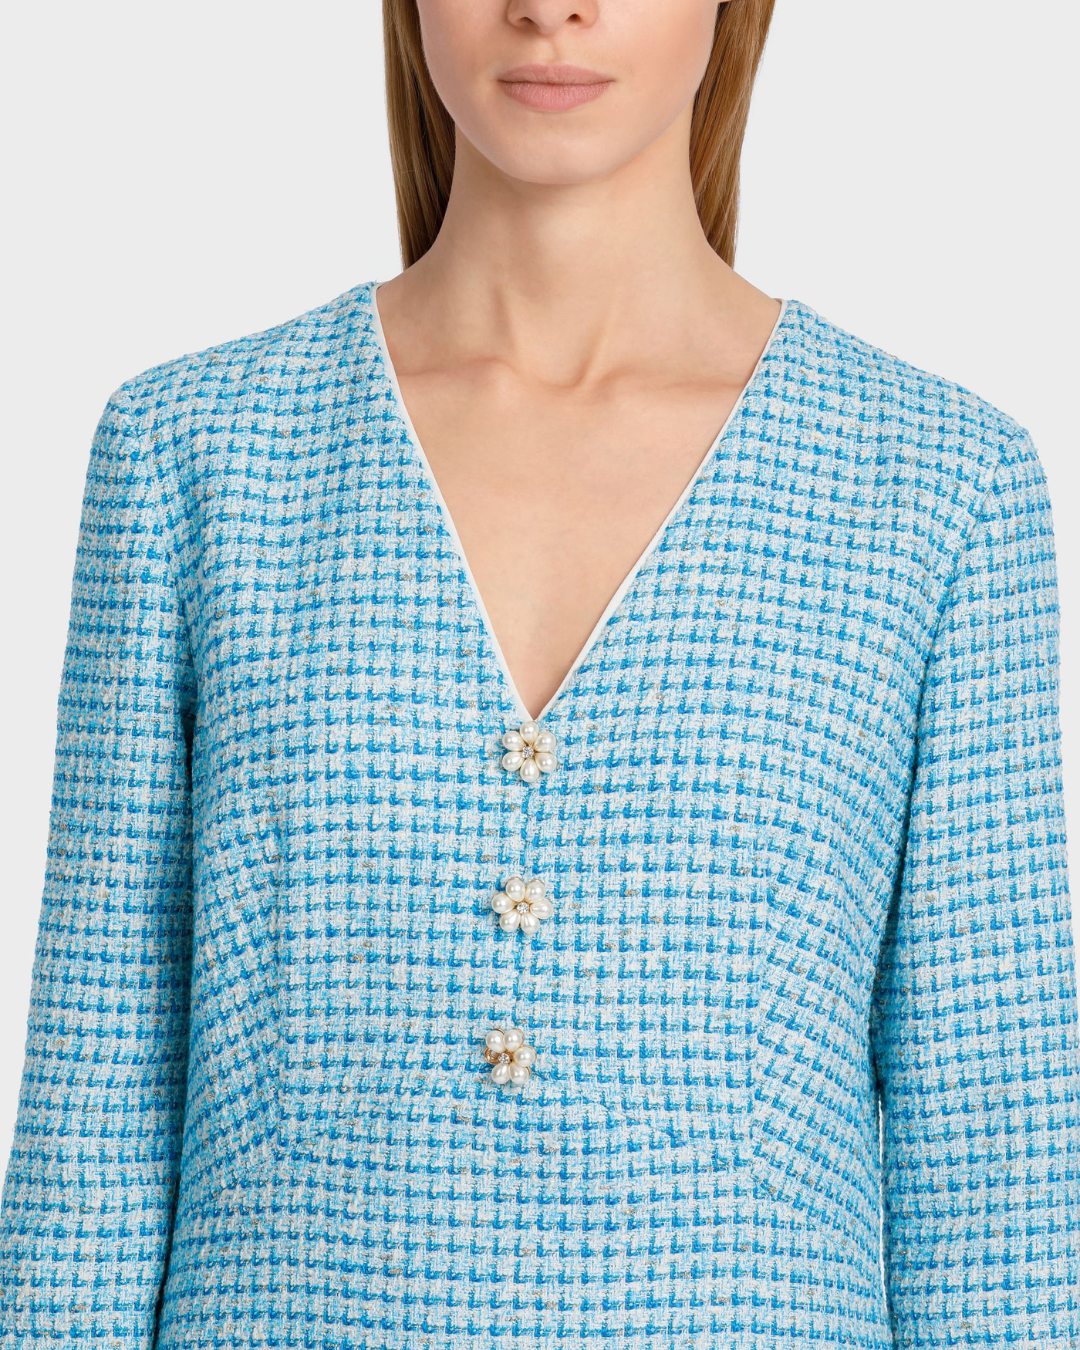 Dress In A Structured Check Pattern